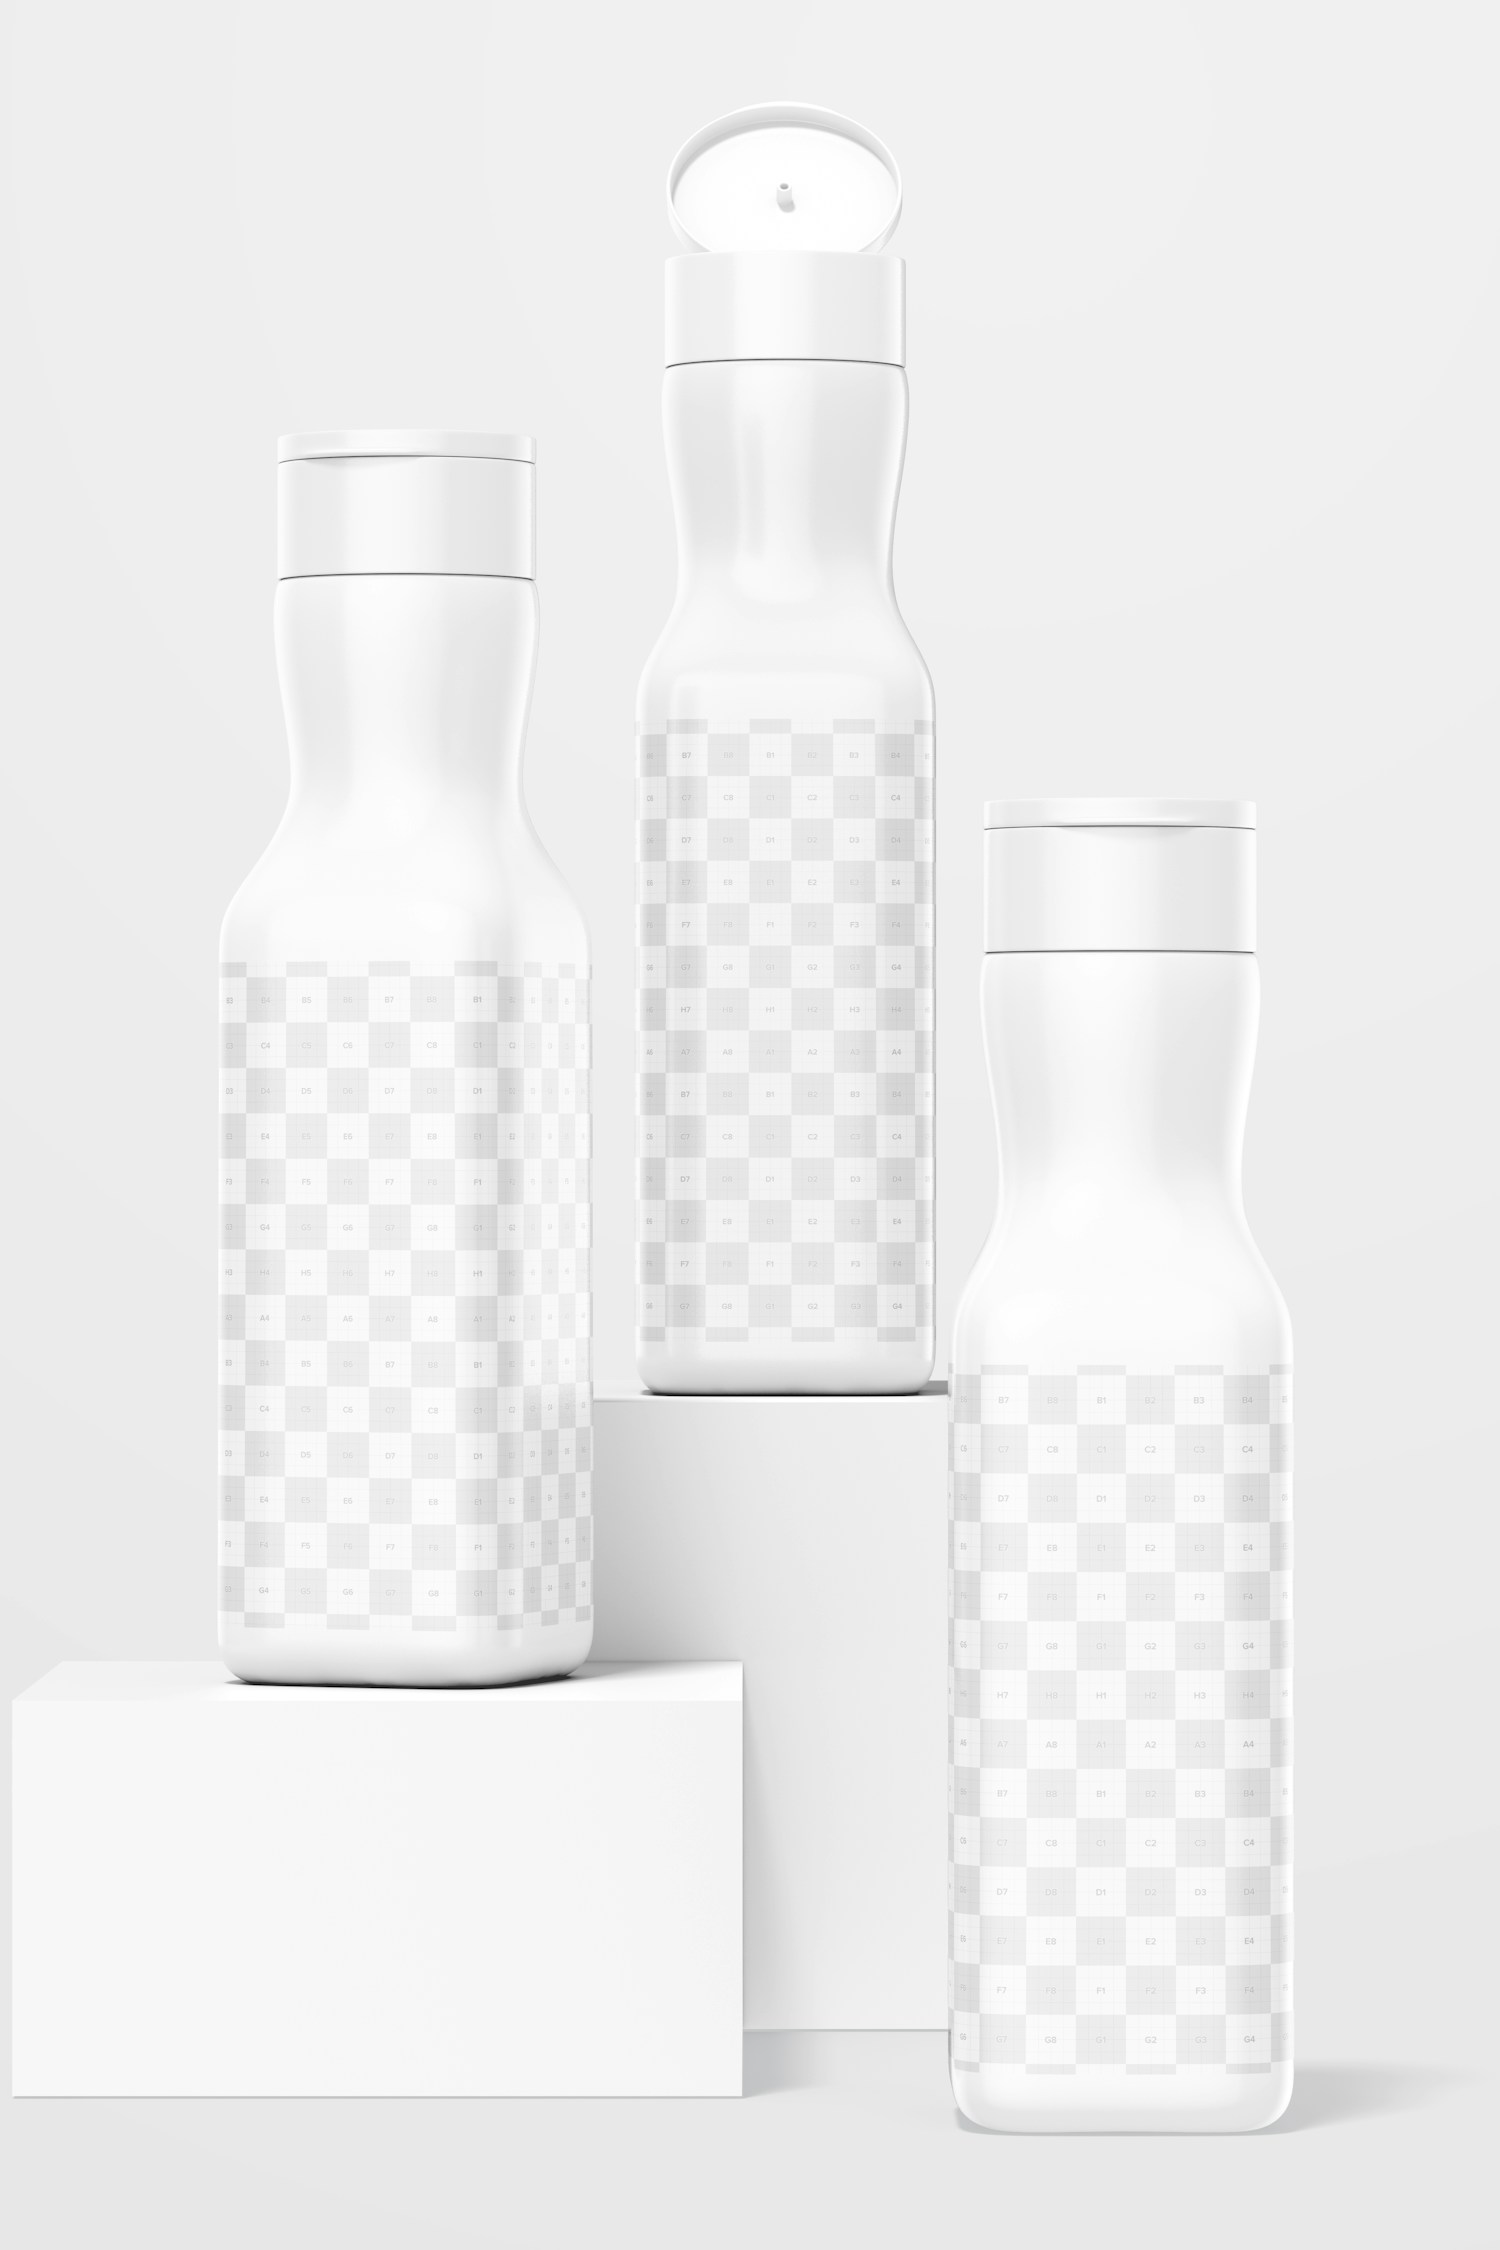 500 ml Hair Treatment Bottles Mockup, Front View